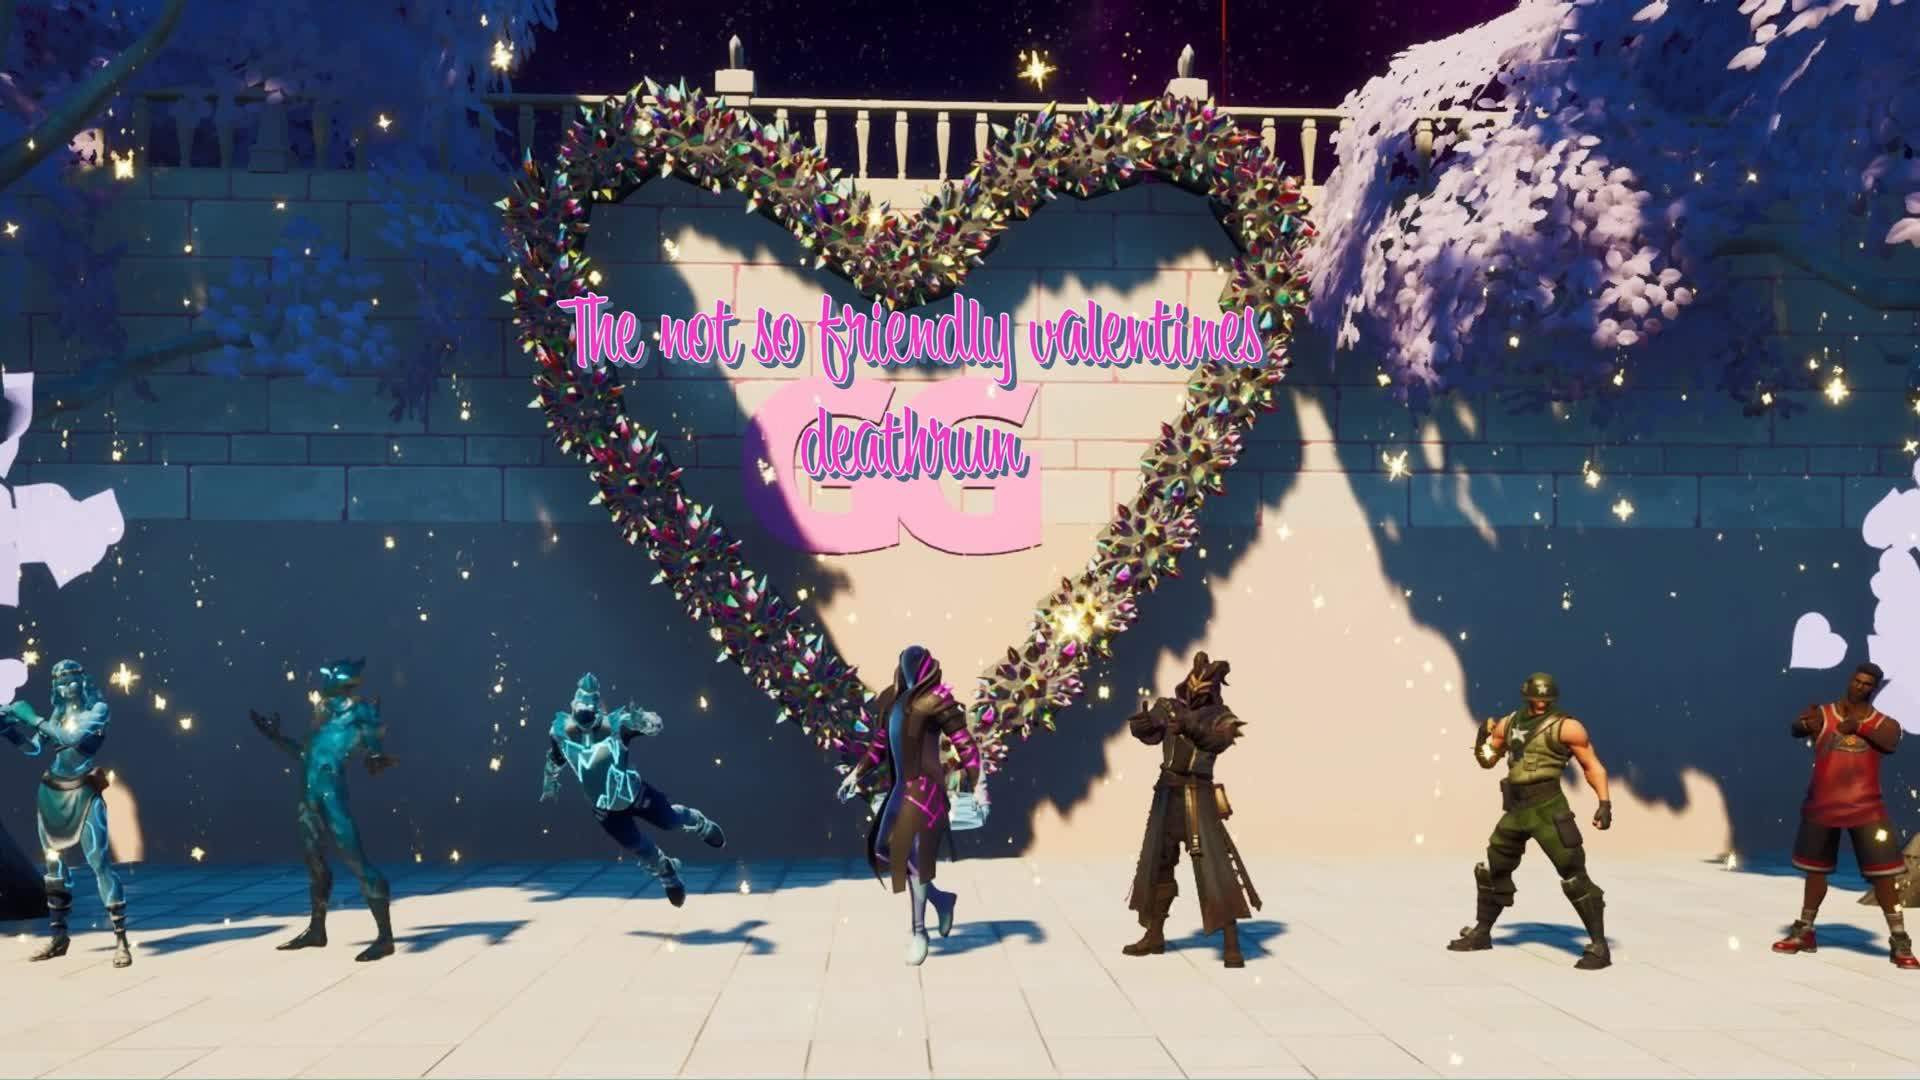 The not so friendly valentines deathrun